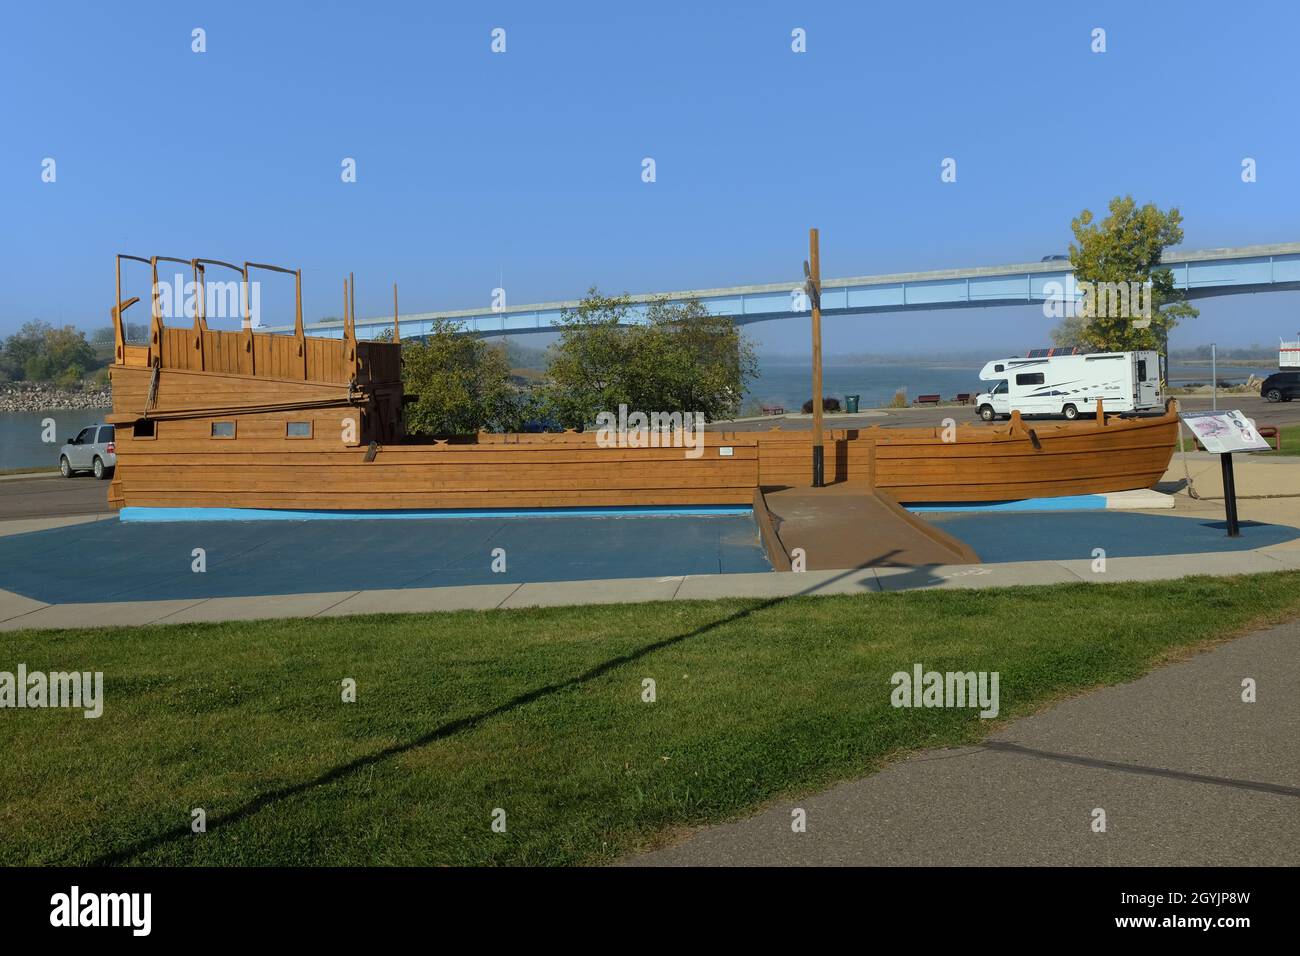 BISMARCK, NORTH DAKOTA - 3 OCT 2021: Keelboat in Keelboat Park, adjacent to the Missouri River and part of the Missouri Valley Legacy Center. Stock Photo